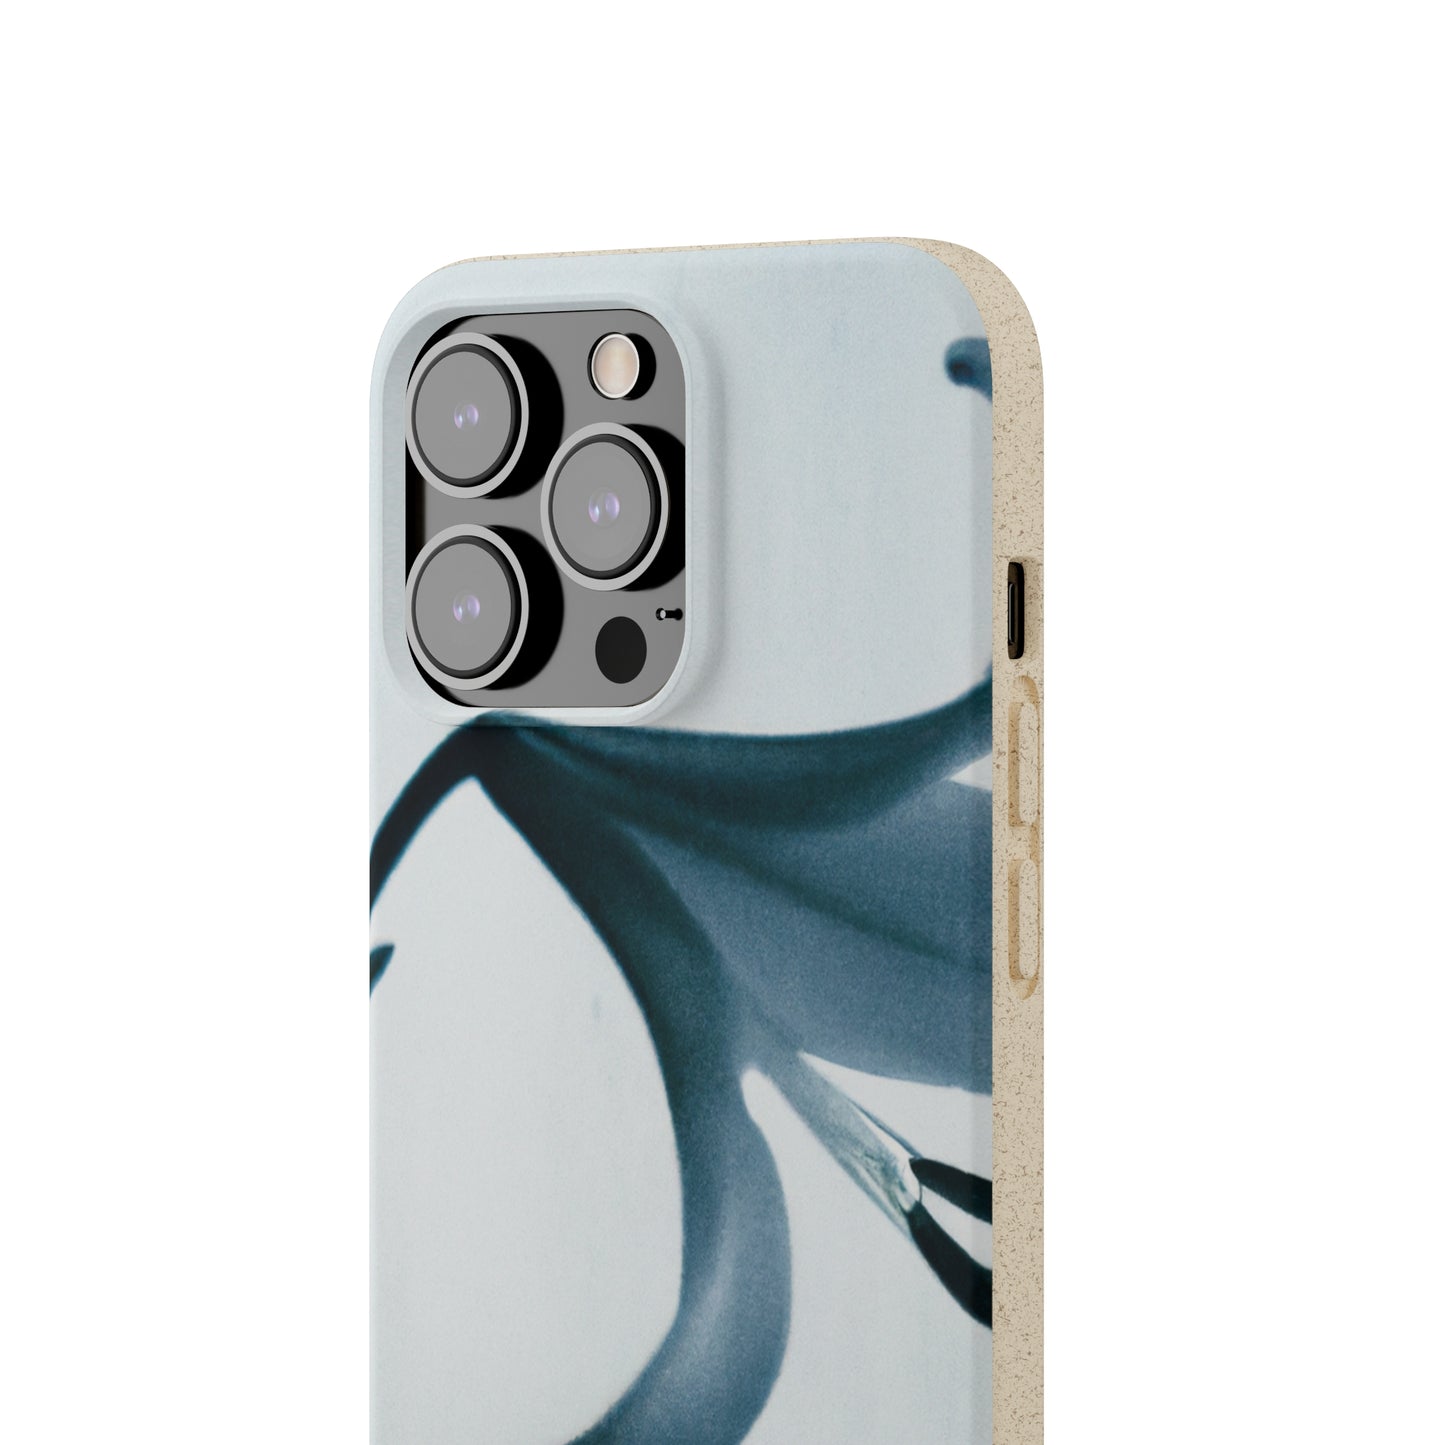 "The Natural Palette" - Bam Boo! Lifestyle Eco-friendly Cases